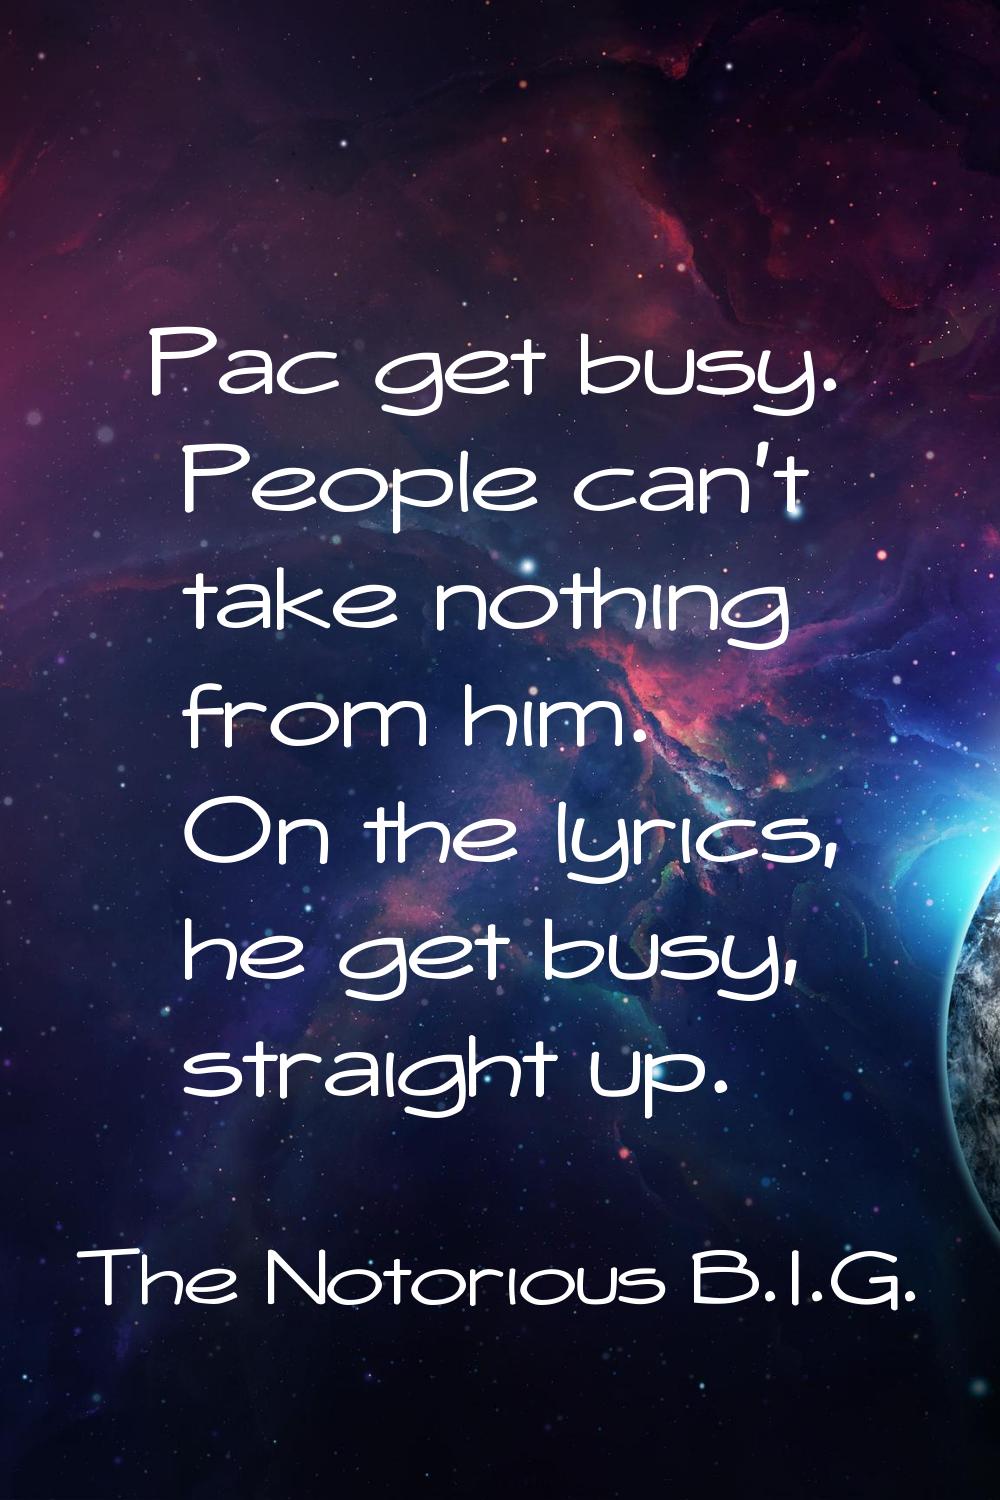 Pac get busy. People can't take nothing from him. On the lyrics, he get busy, straight up.